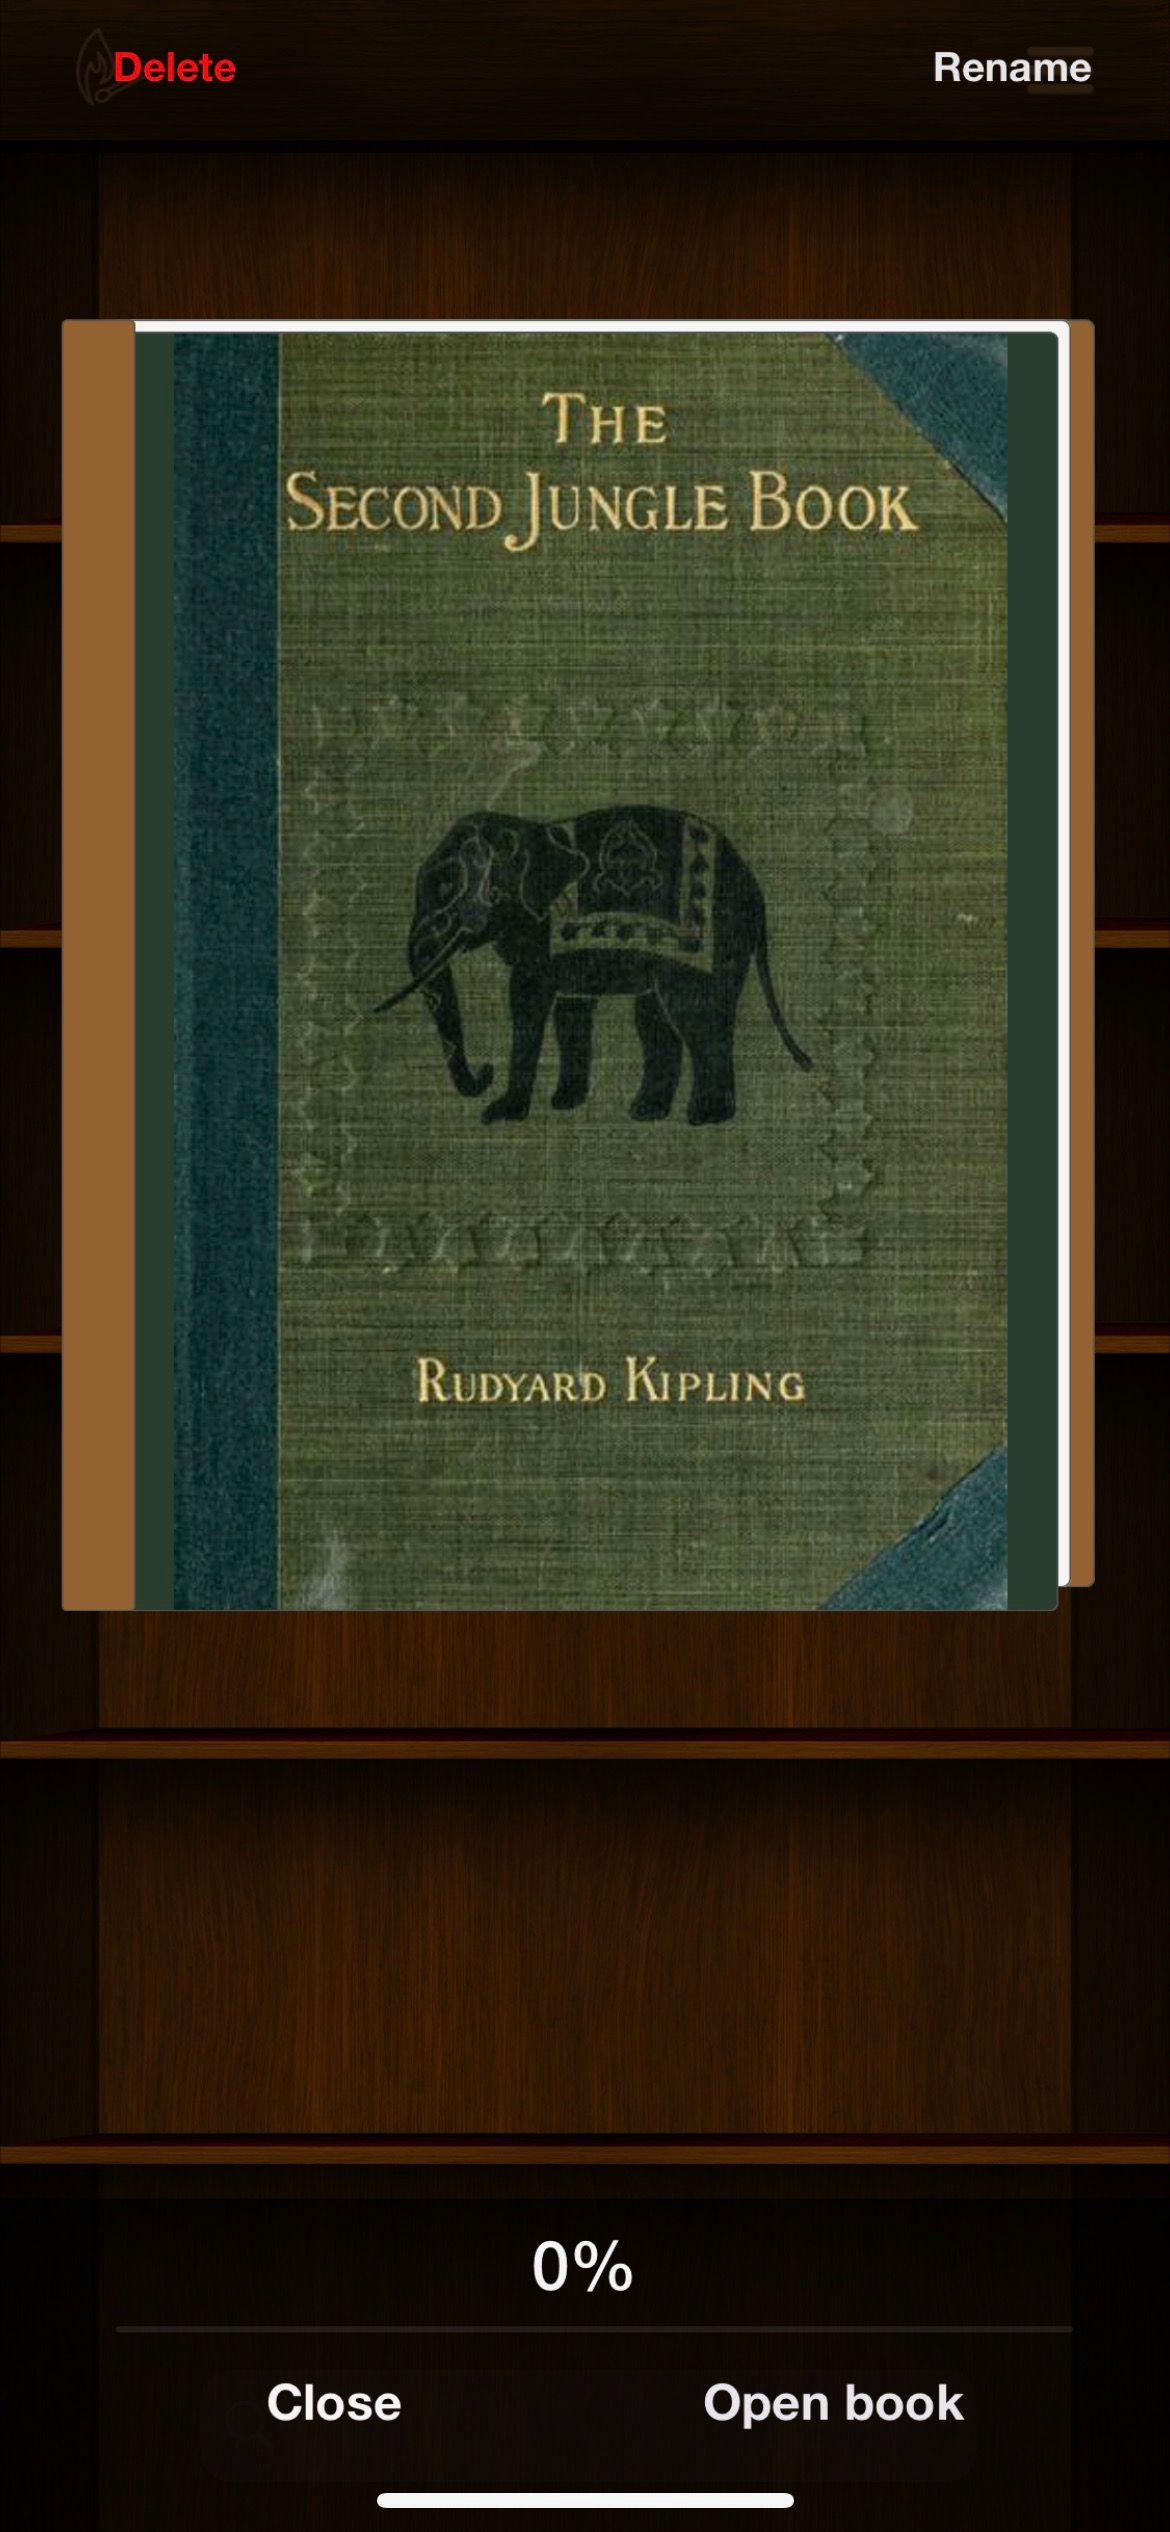 ReadMe! Library, the Second Jungle Book.